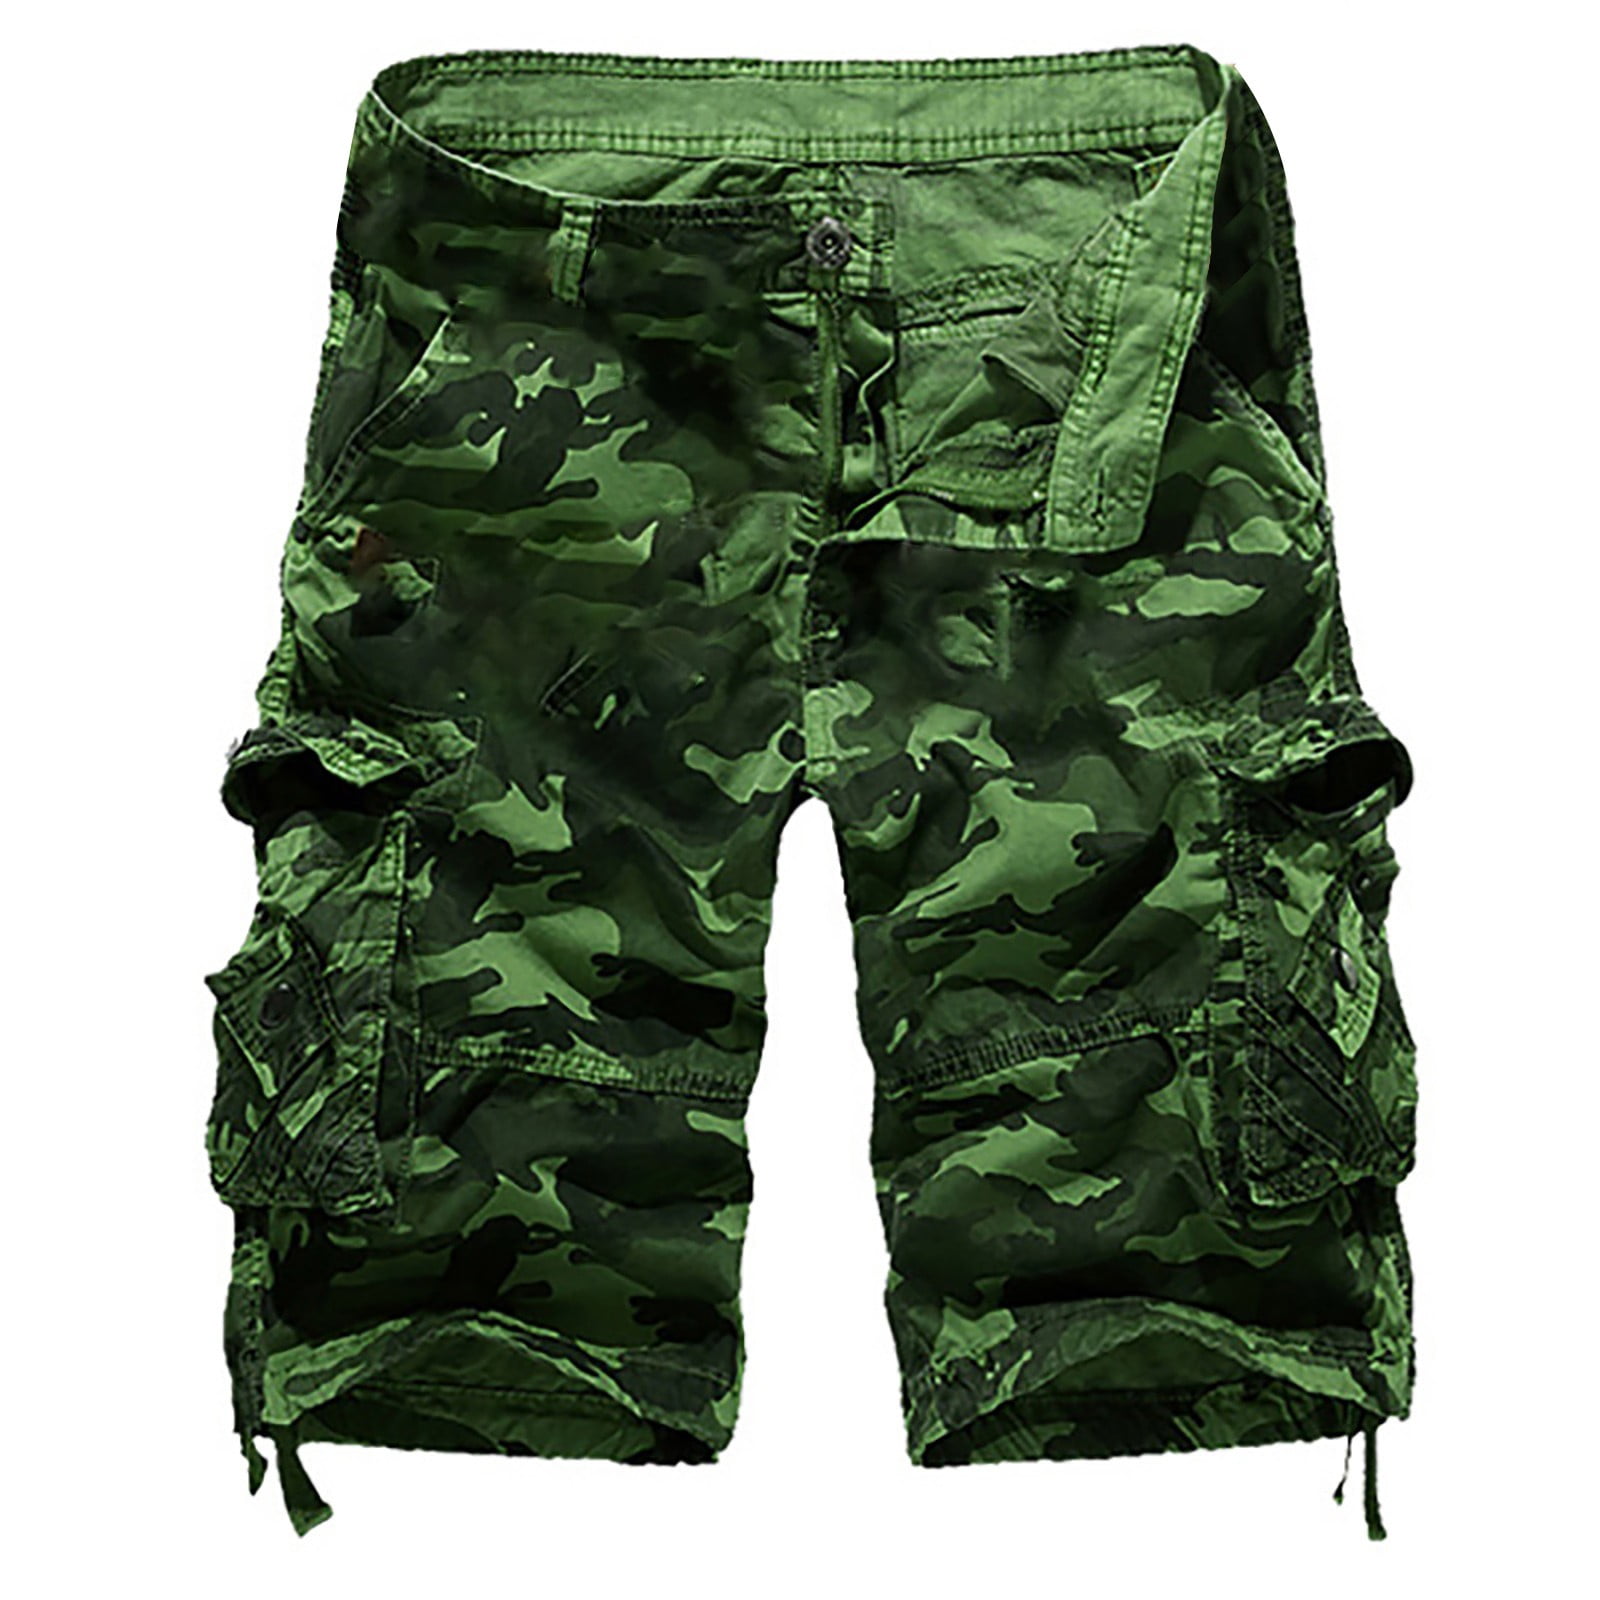 Han Wild Summer Fishing Shorts Tactical Cargo Shorts Men Military Paintball Camouflage Waterproof